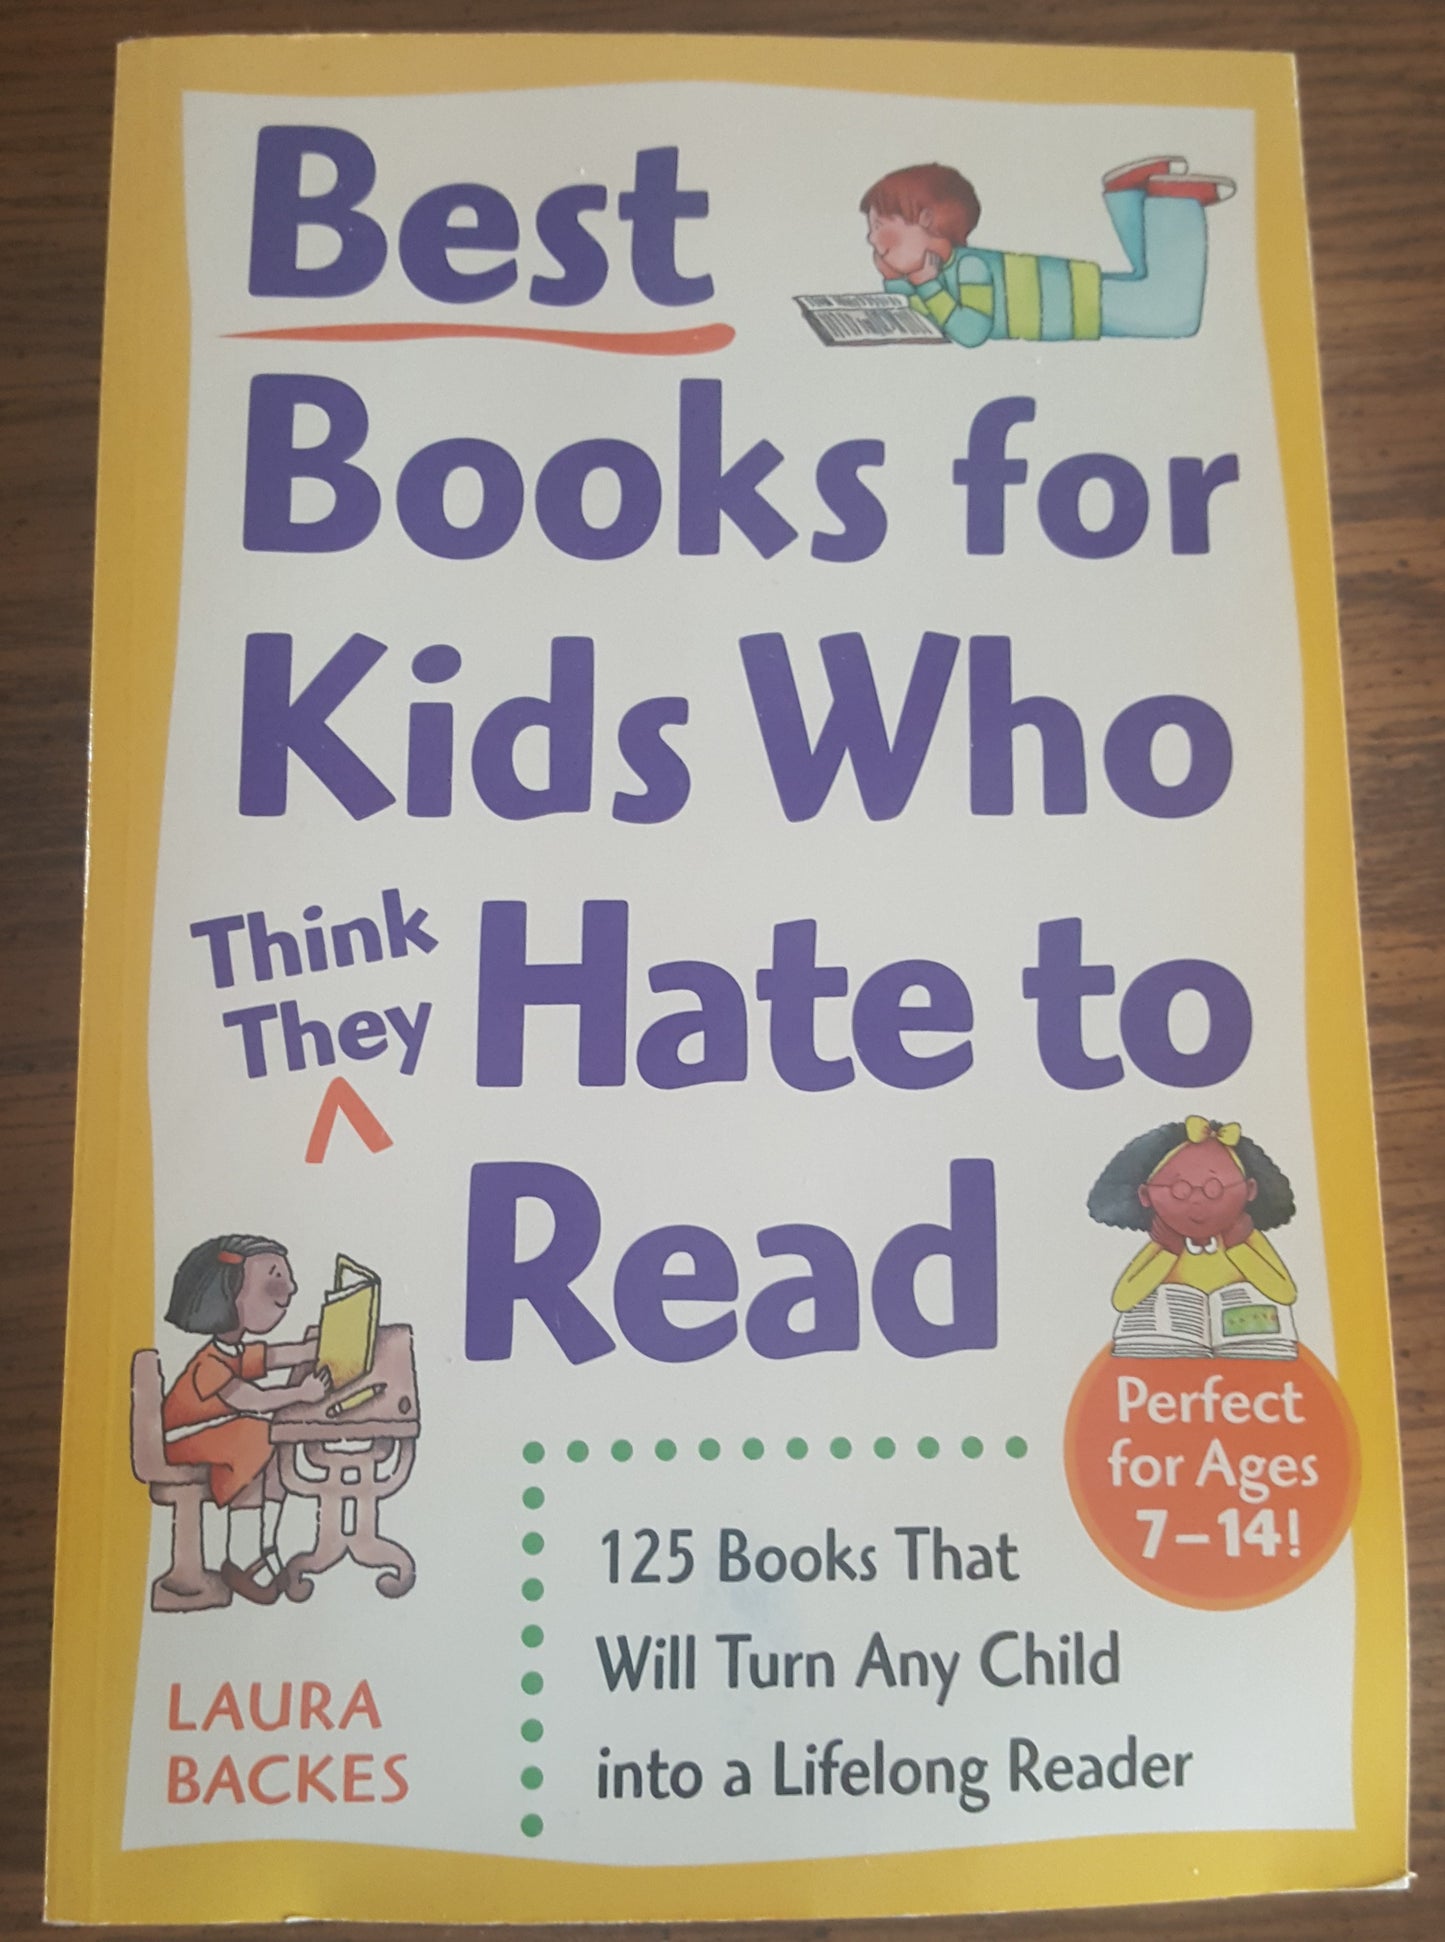 Best Books for Kids Who Hate to Read